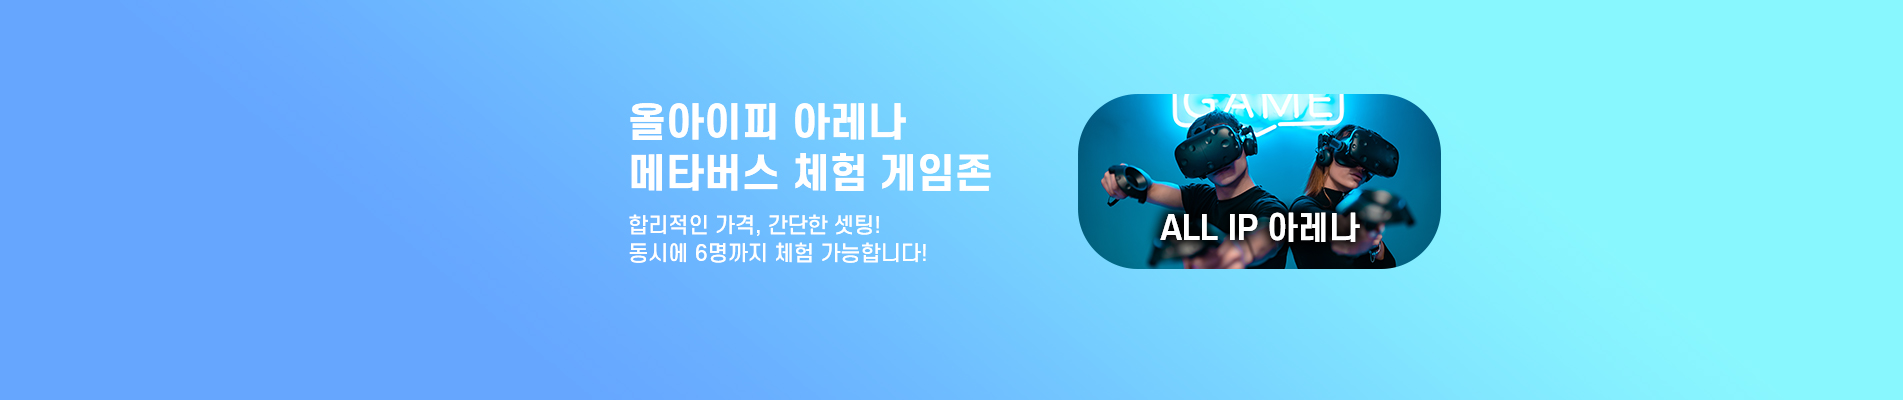 https://www.ipmall.co.kr/goods/goods_view.php?good